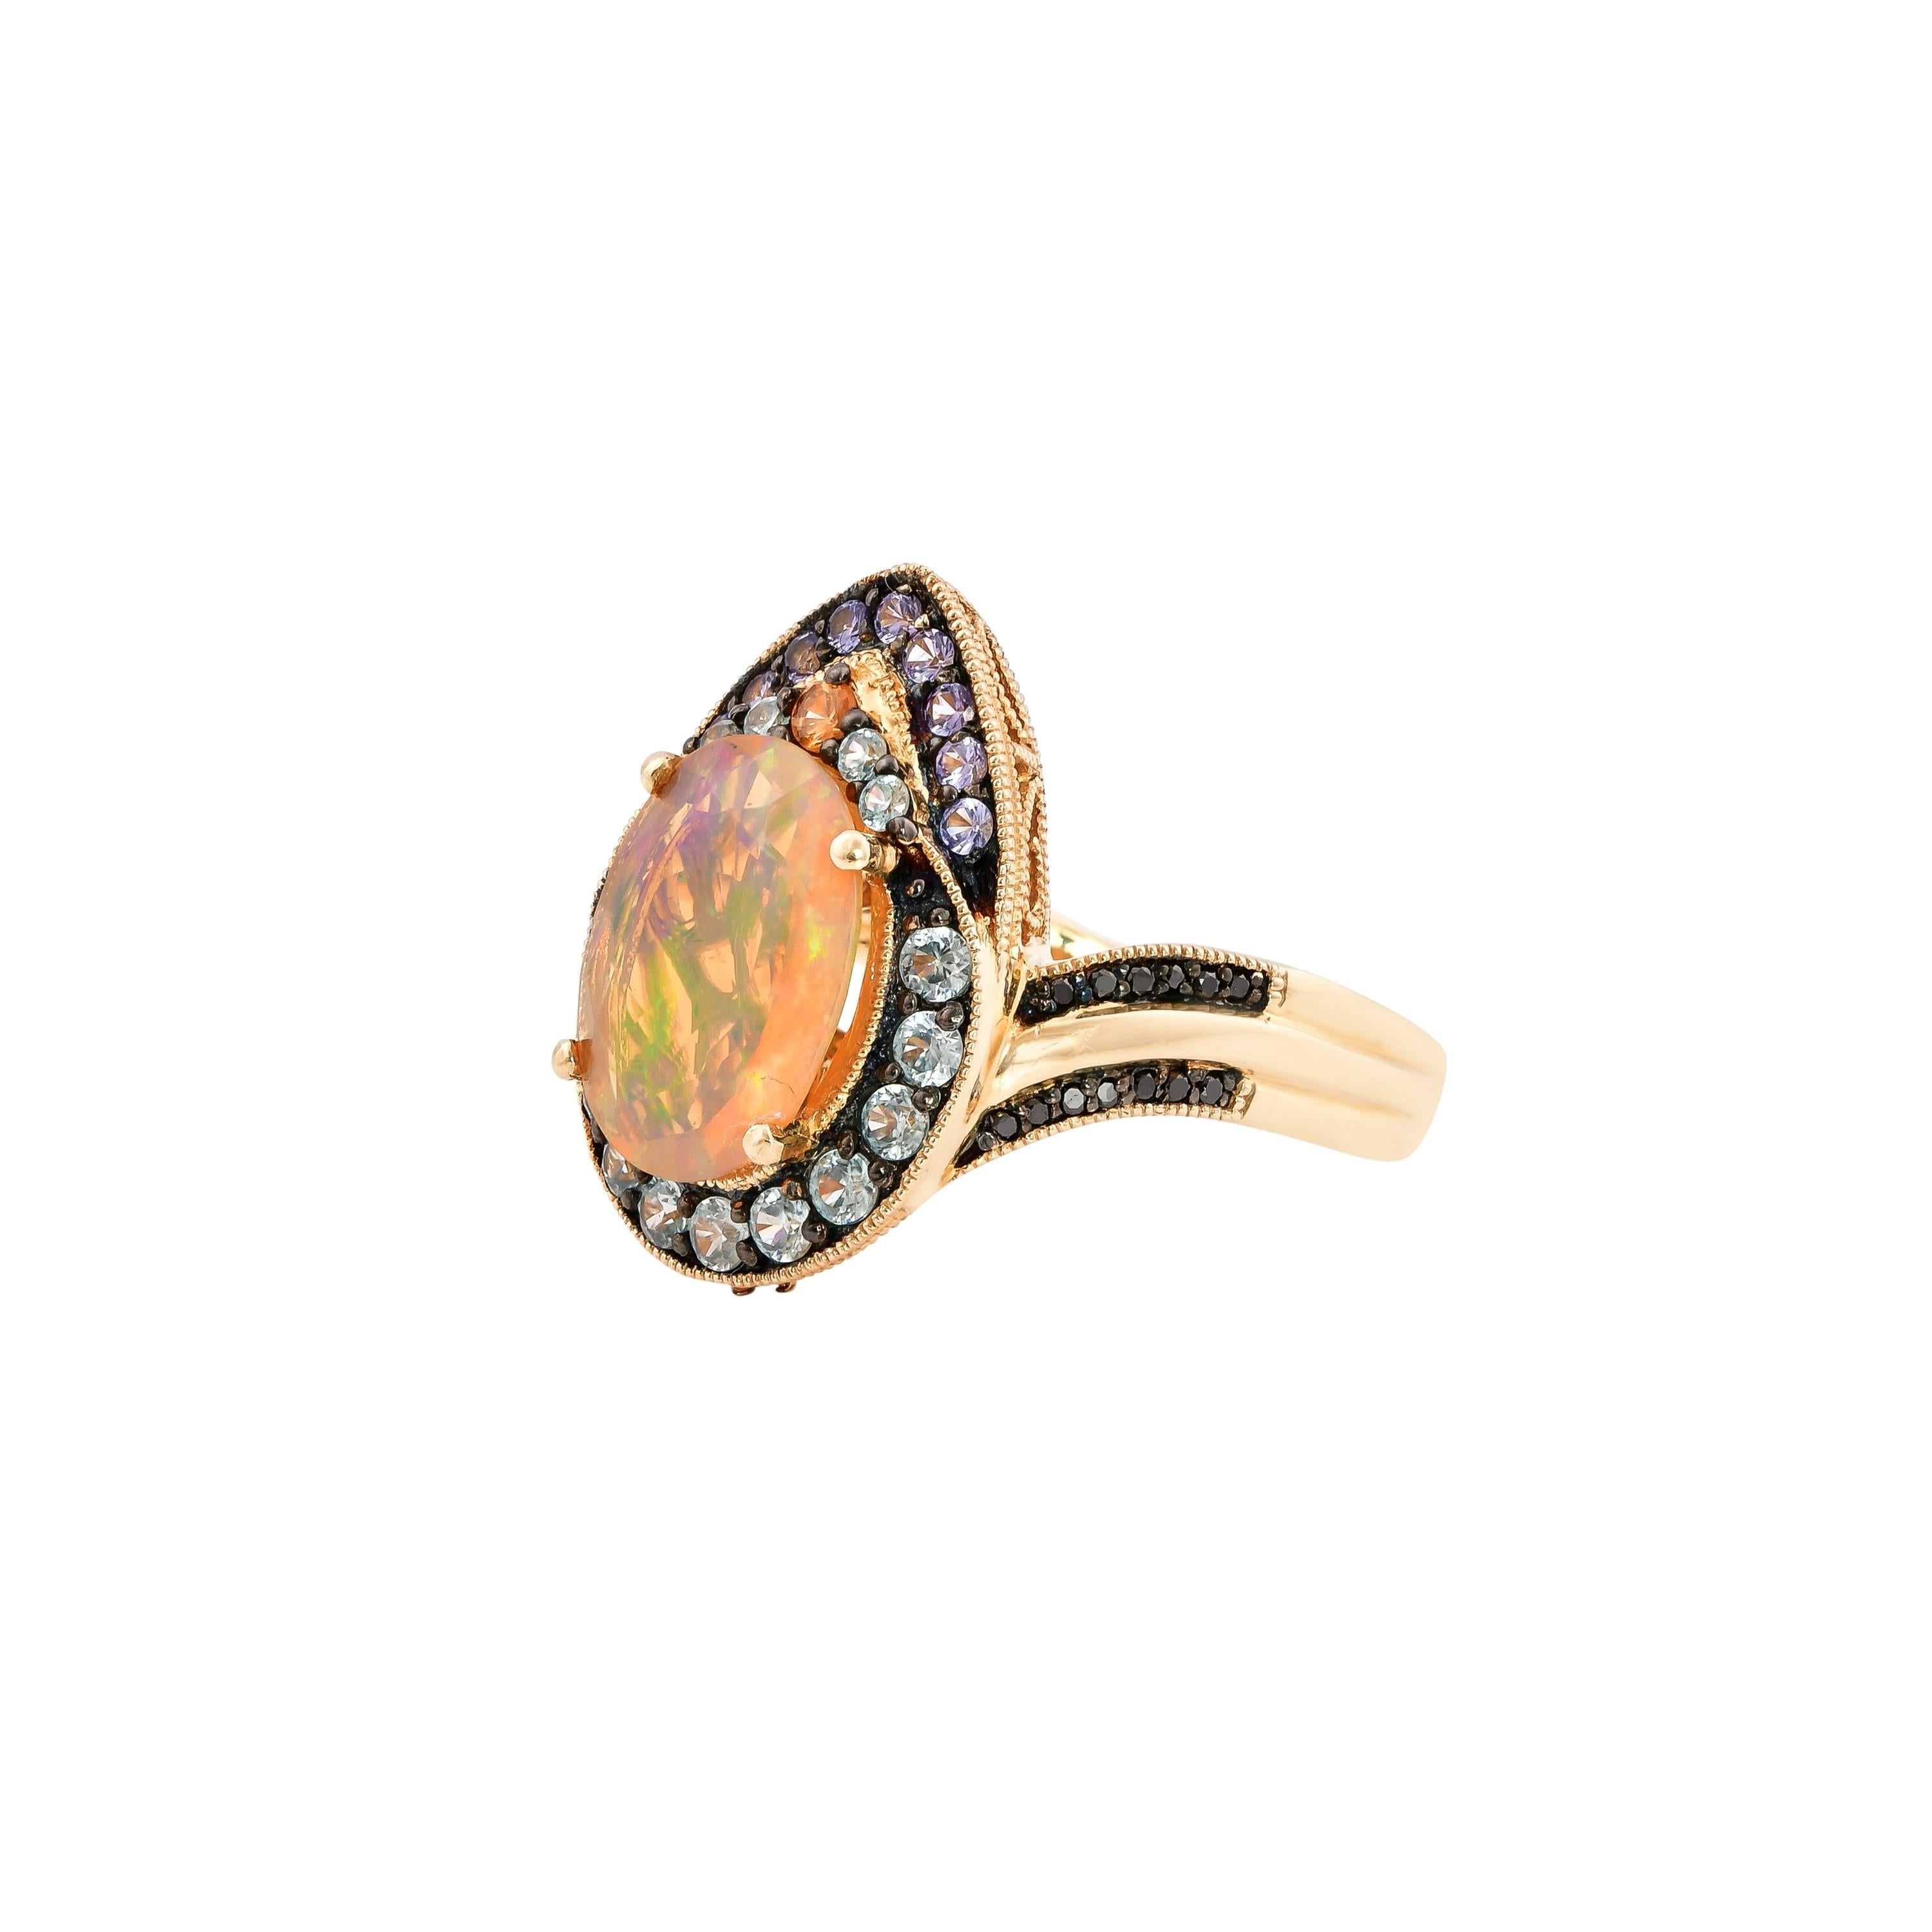 Contemporary 1.8 Carat Ethiopian Opal Ring in 14 Karat Yellow Gold with Diamonds For Sale